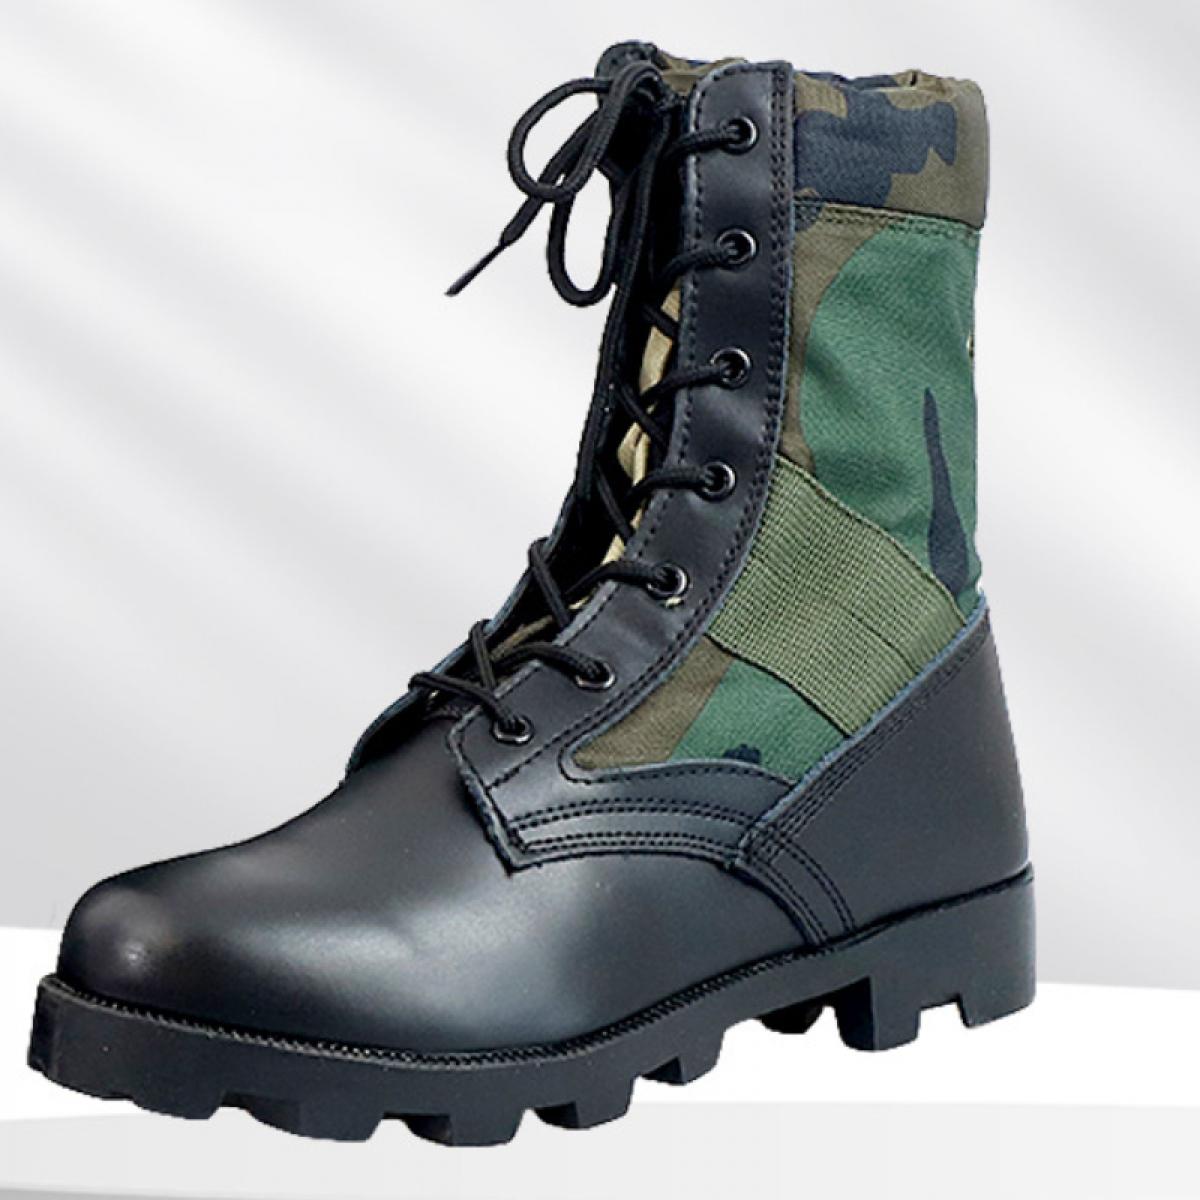 Men's Camouflage Desert Boots Spring Autumn Hiking Combat Boots Round Toe Lace Up Training Shoes Botas Militares Hombres